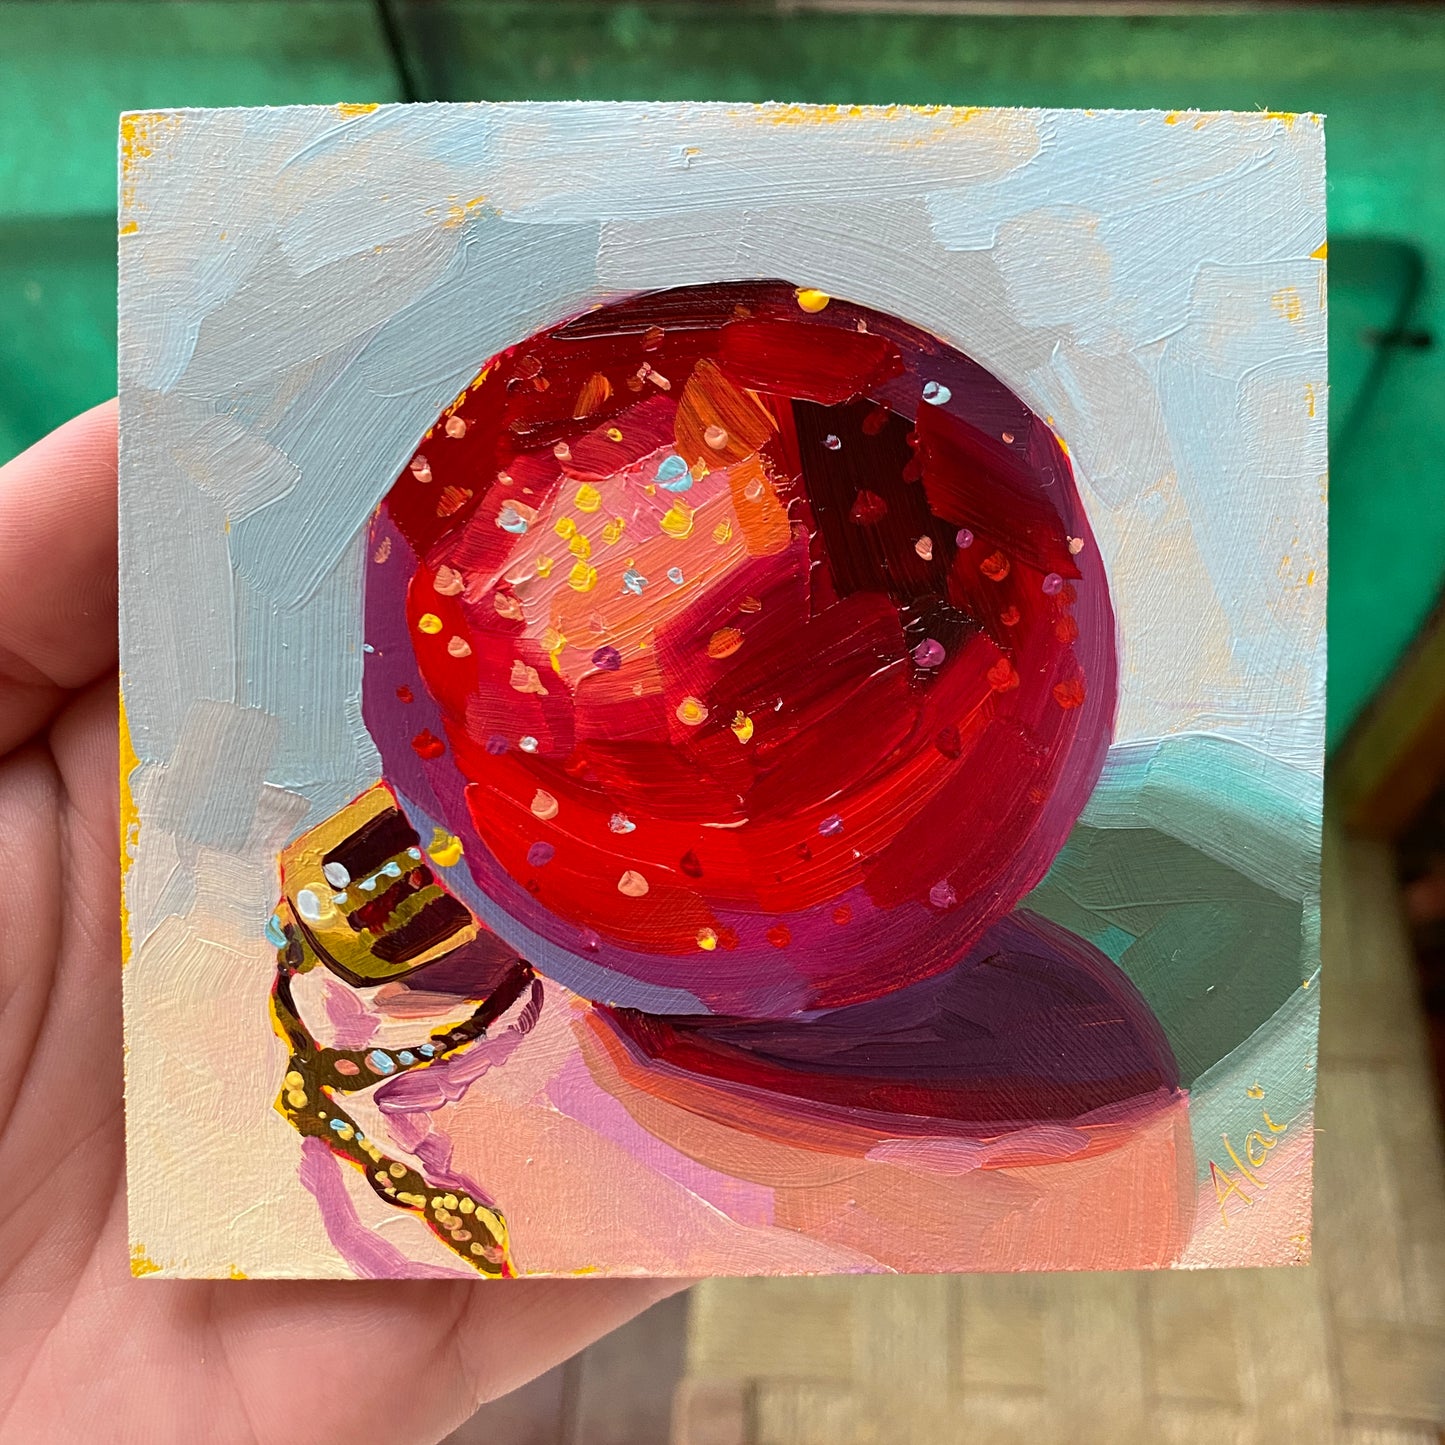 Red christmas ball (glittery) - Original Oil painting